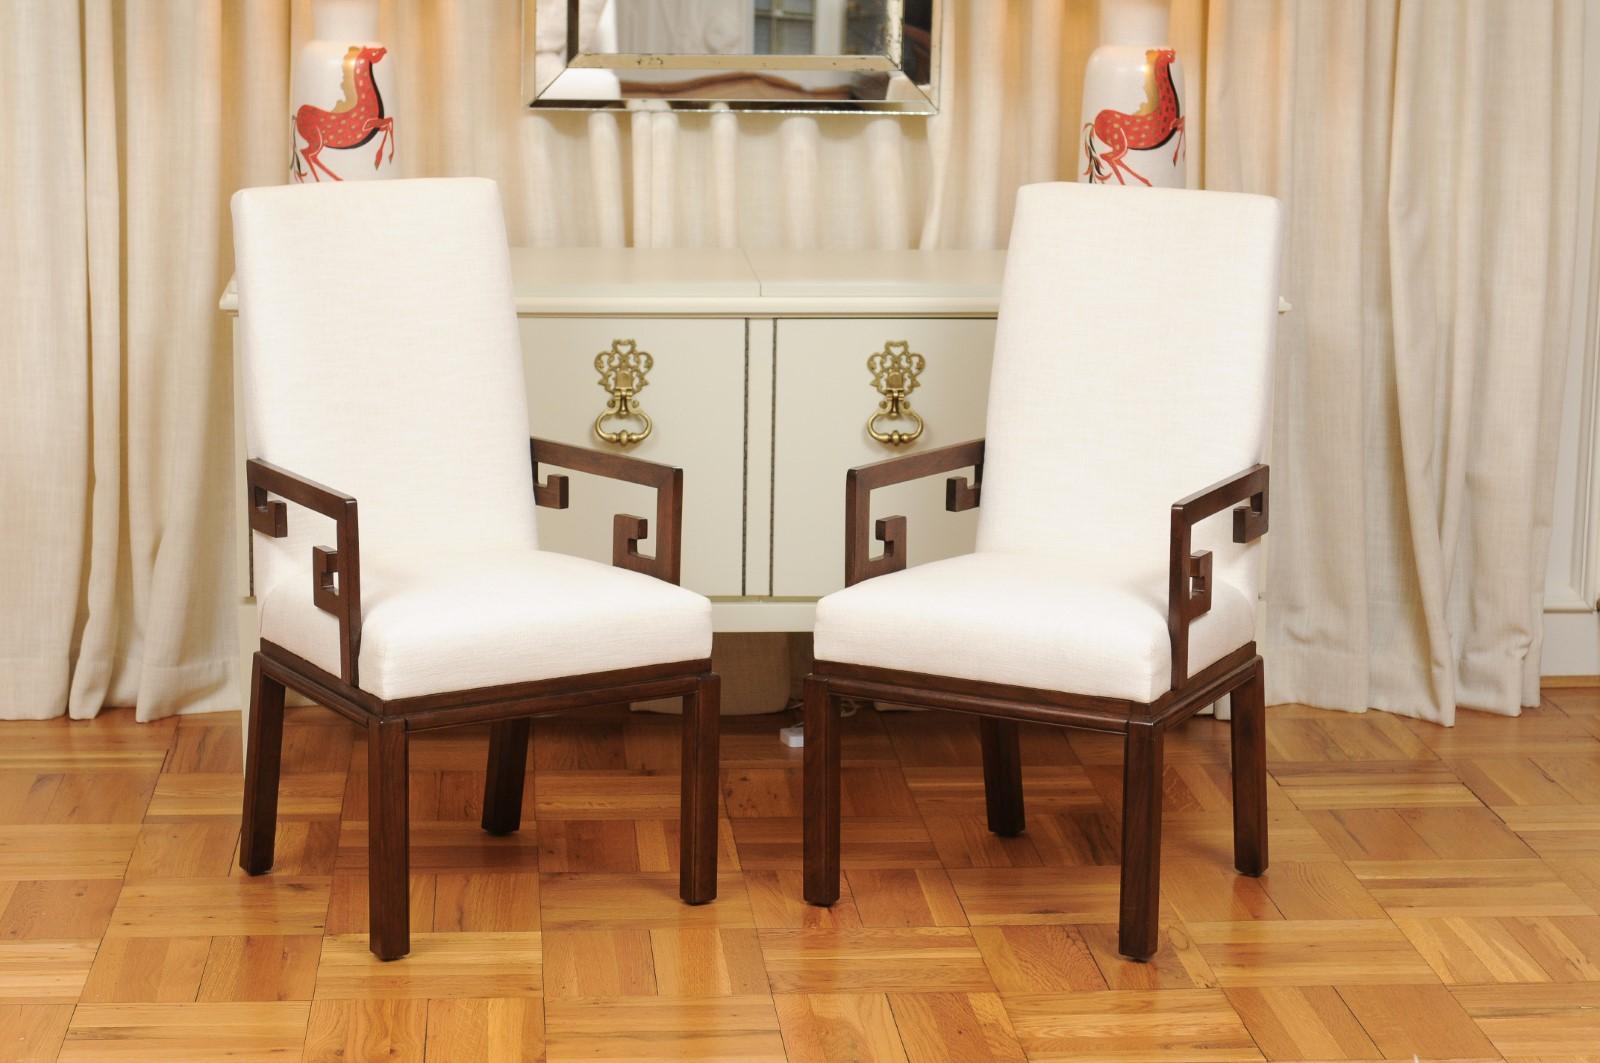 All Arms, Sublime Set of 20 Greek Key Chairs by Michael Taylor, circa 1970 For Sale 9